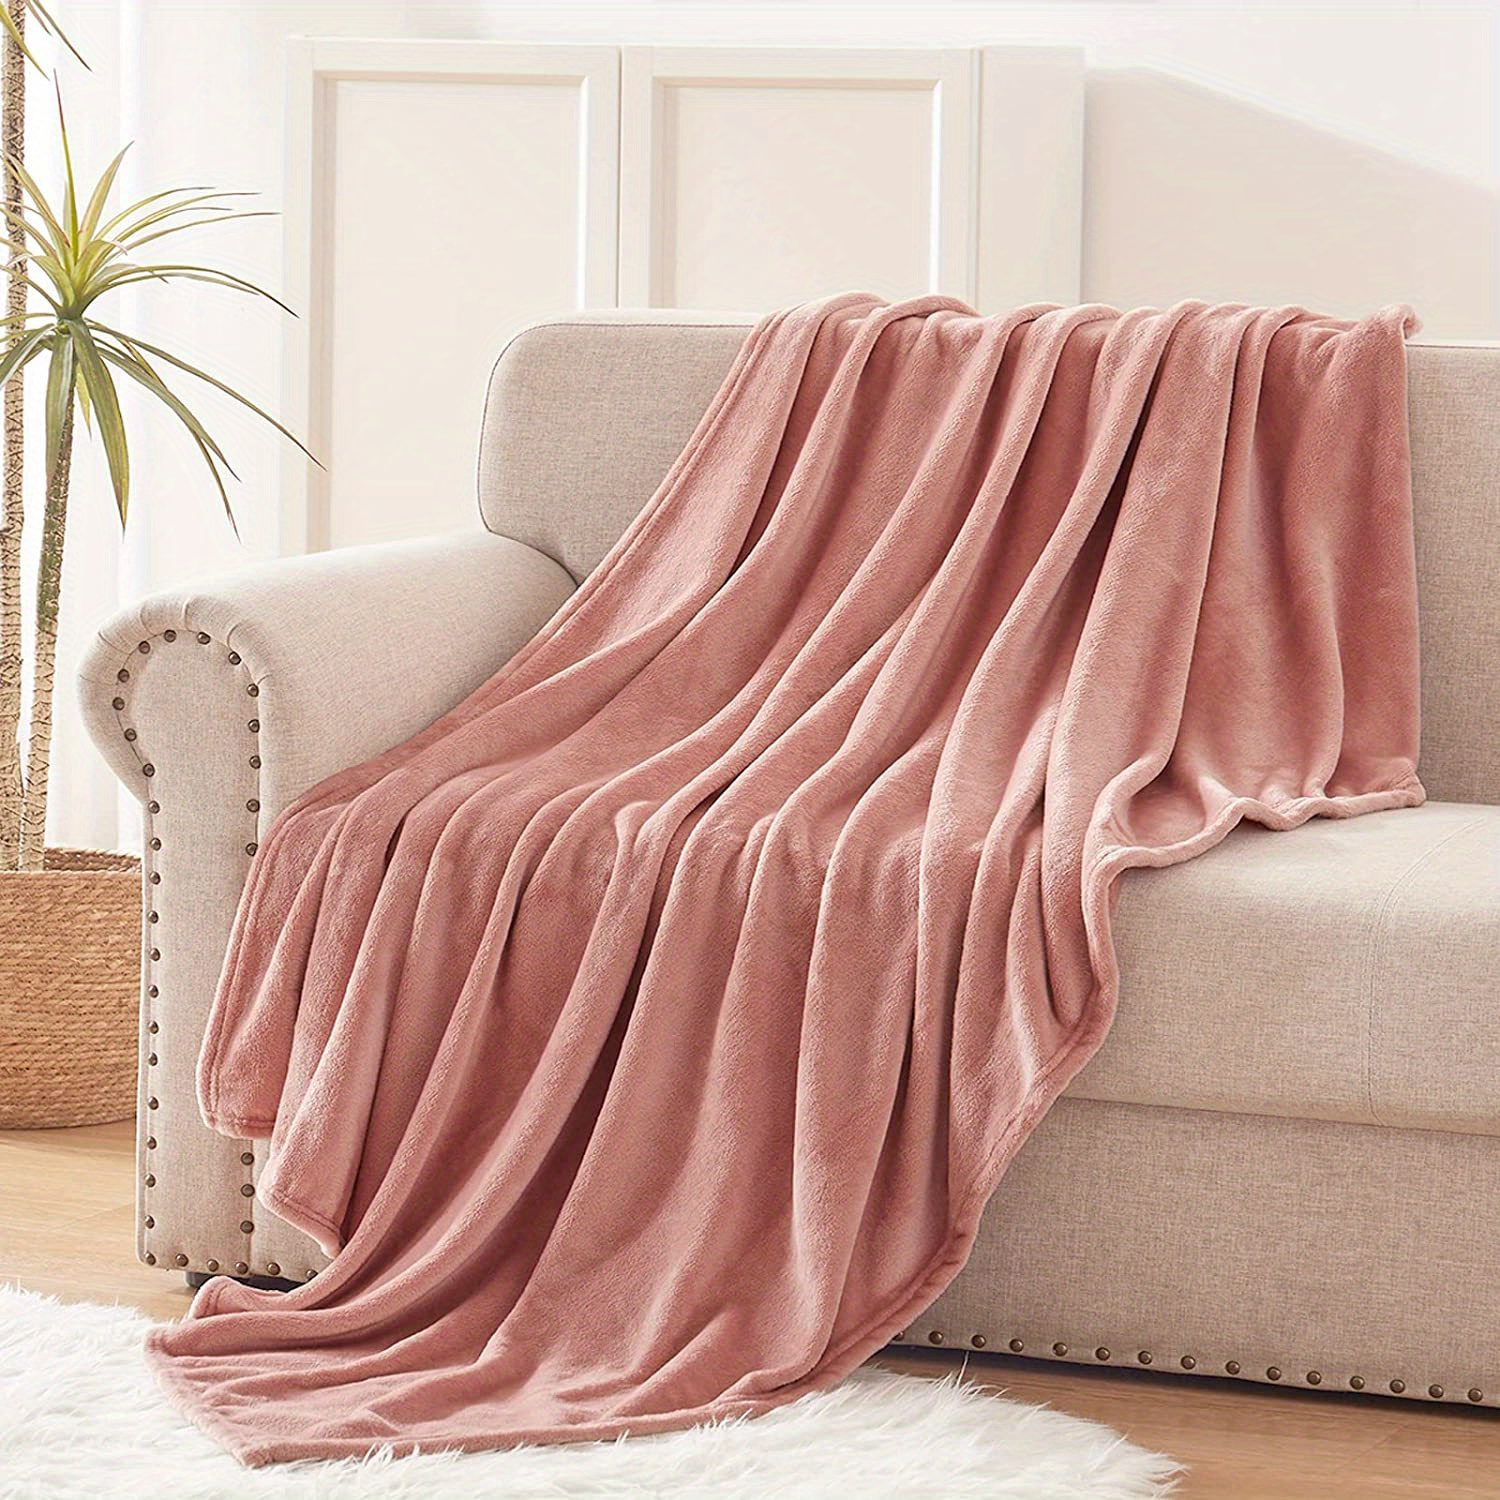 VAS COLLECTION® Premium Plush Single Blanket | 300 GSM Lightweight Cozy  Soft for Bed, Sofa, Couch, Travel & Camping| 150x220 cm or 60X86 inches |  Pink